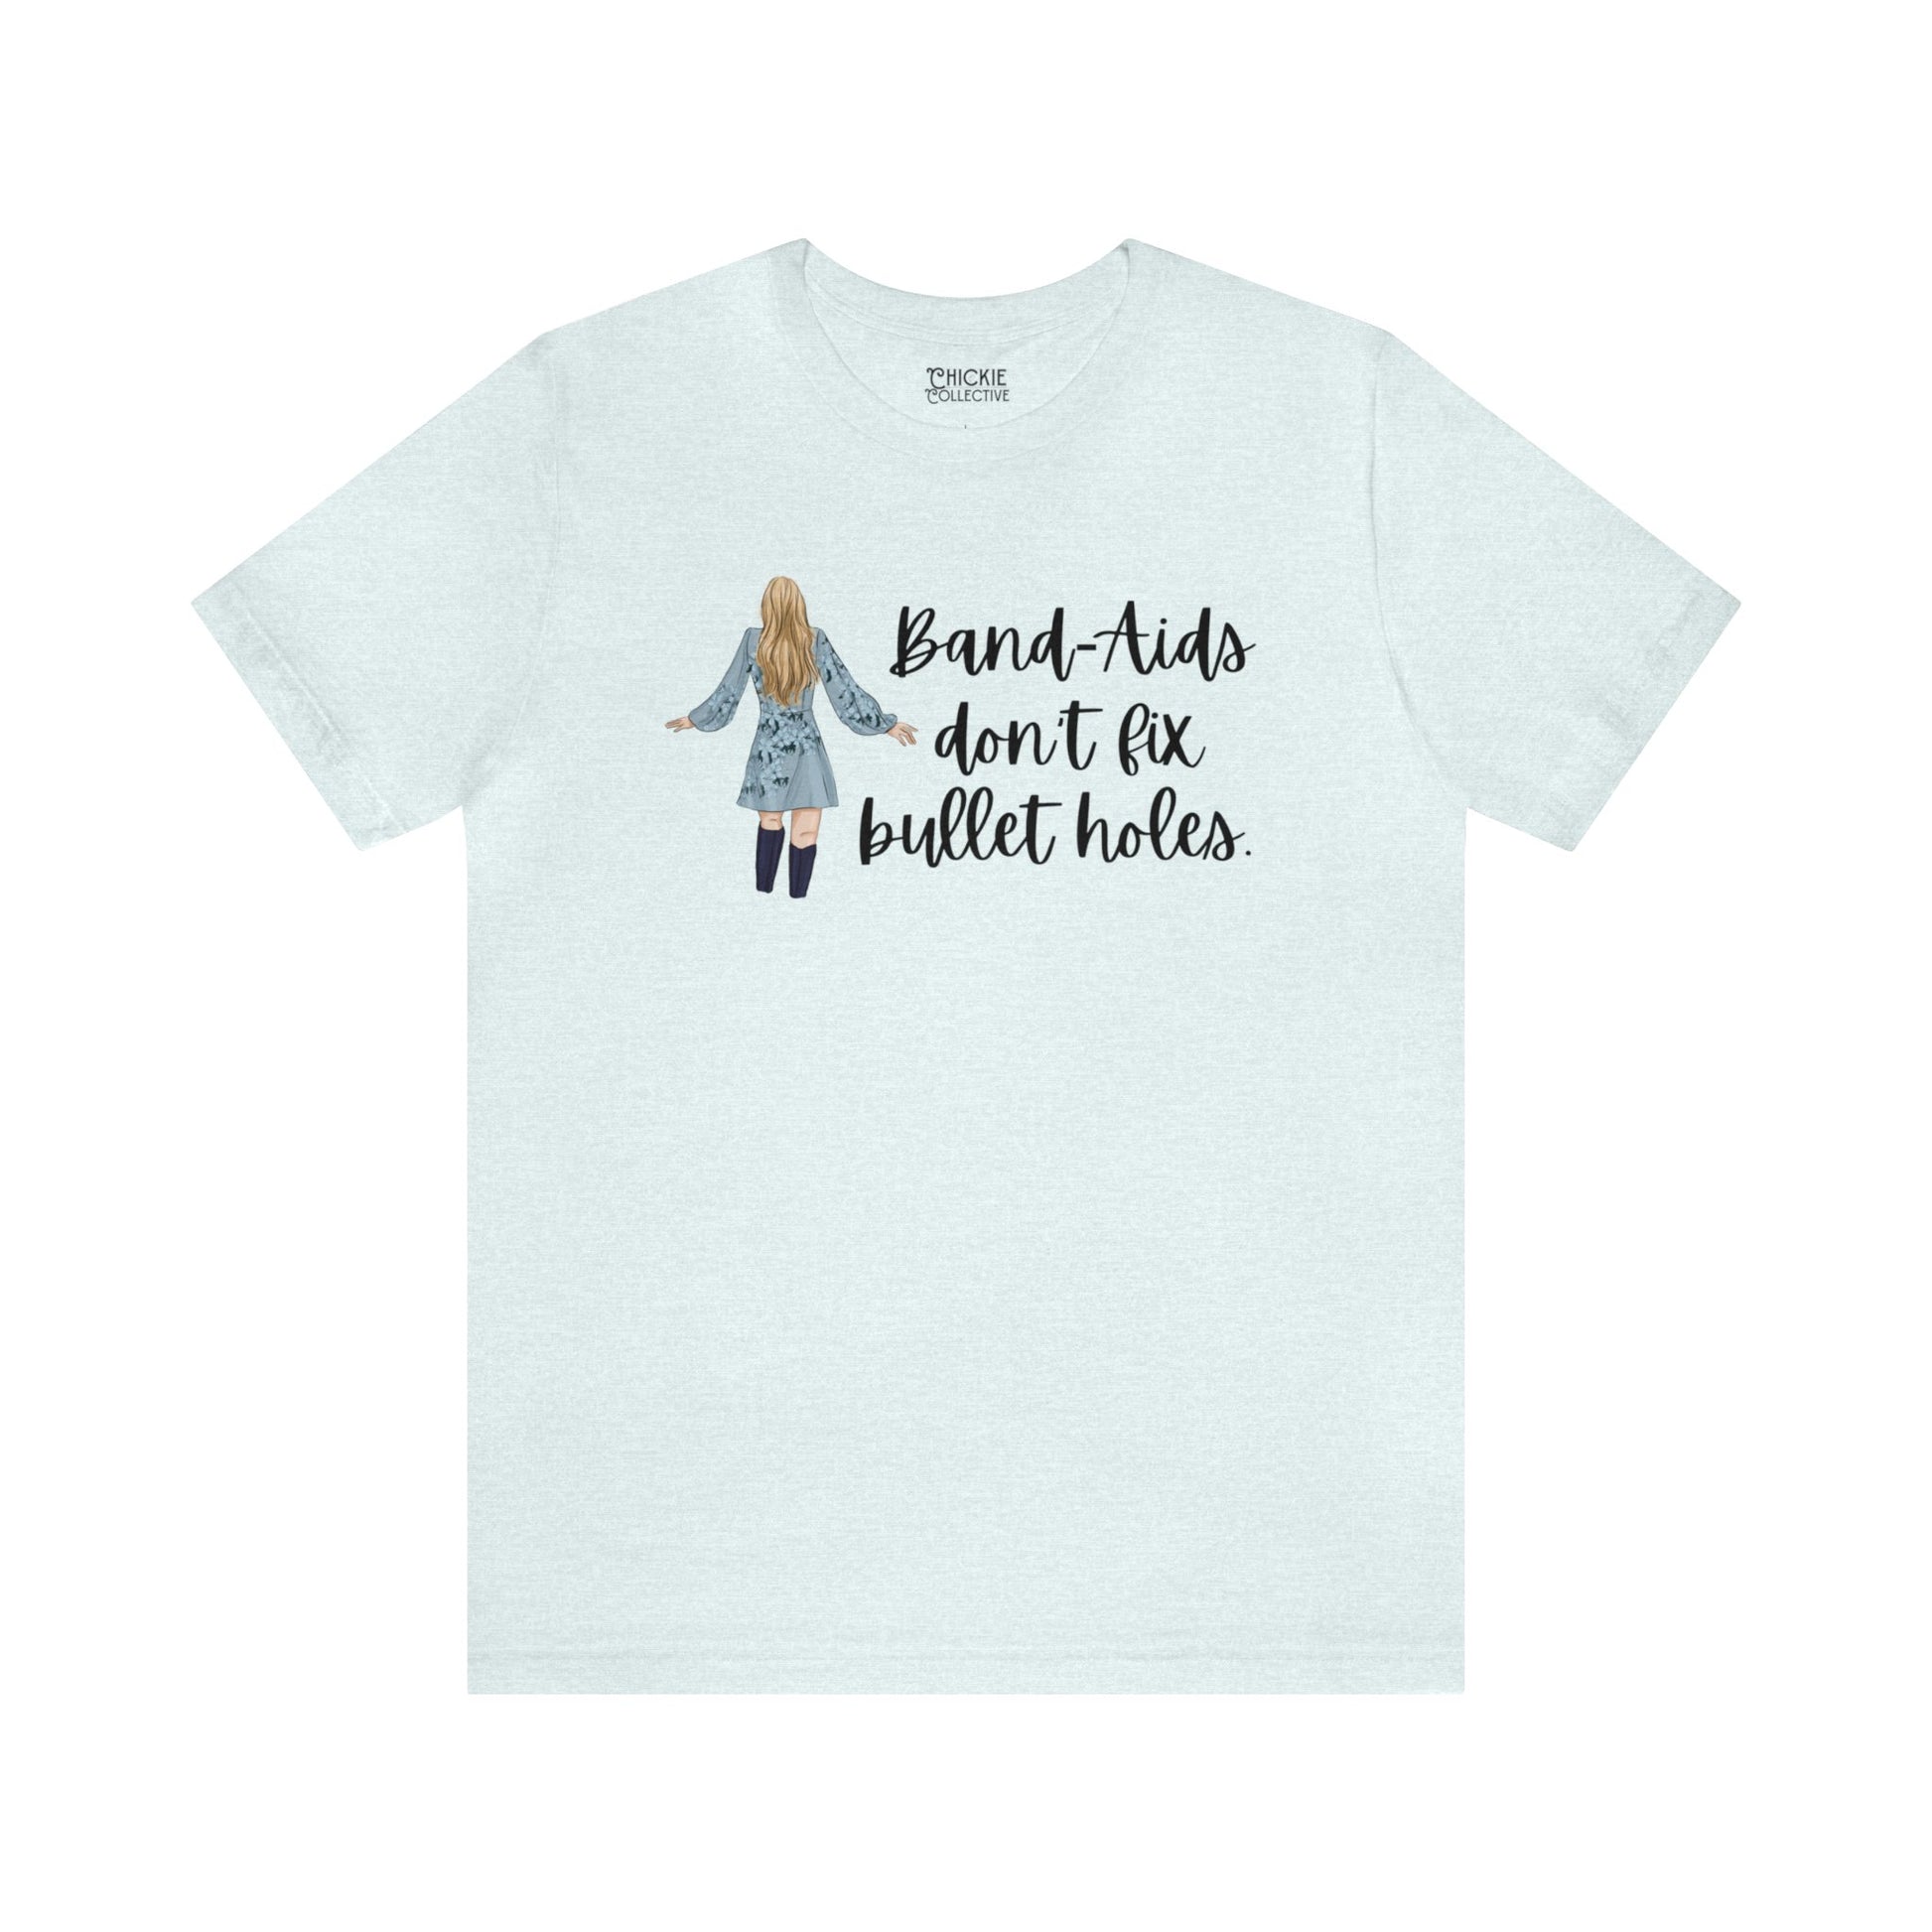 Taylor Swift Preppy Picture T-Shirt - Bandaids Don't Fix Bullet holes T-Shirt Heather Ice Blue S  - Chickie Collective